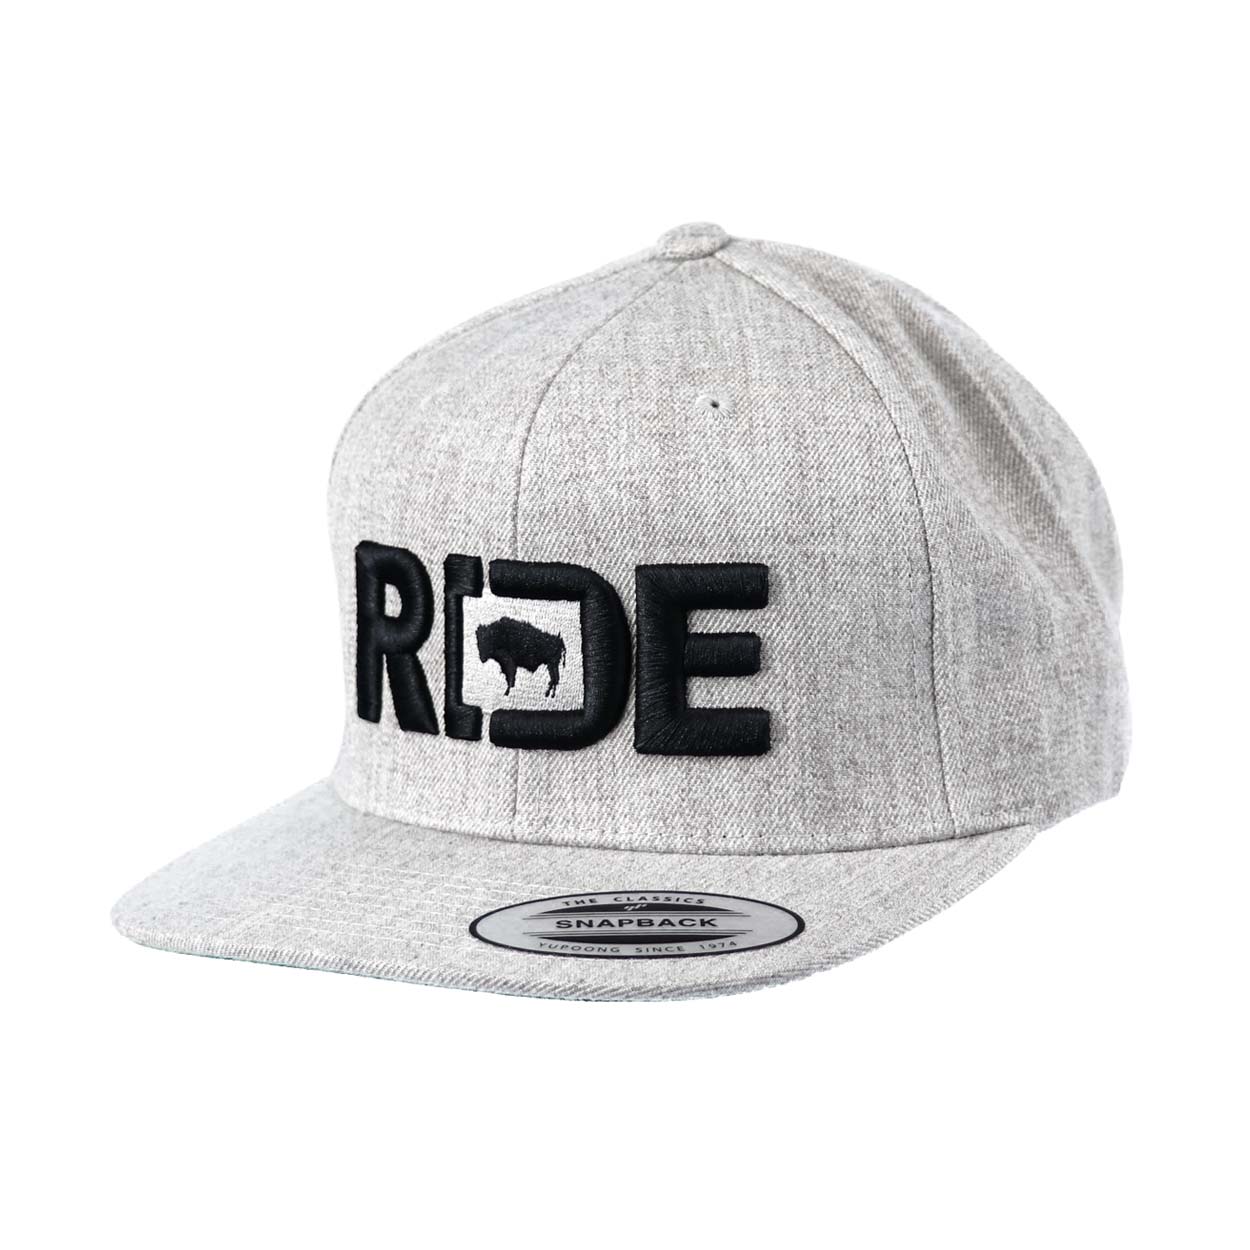 Ride Wyoming Classic Pro 3D Puff Embroidered Snapback Flat Brim Hat Heather Gray